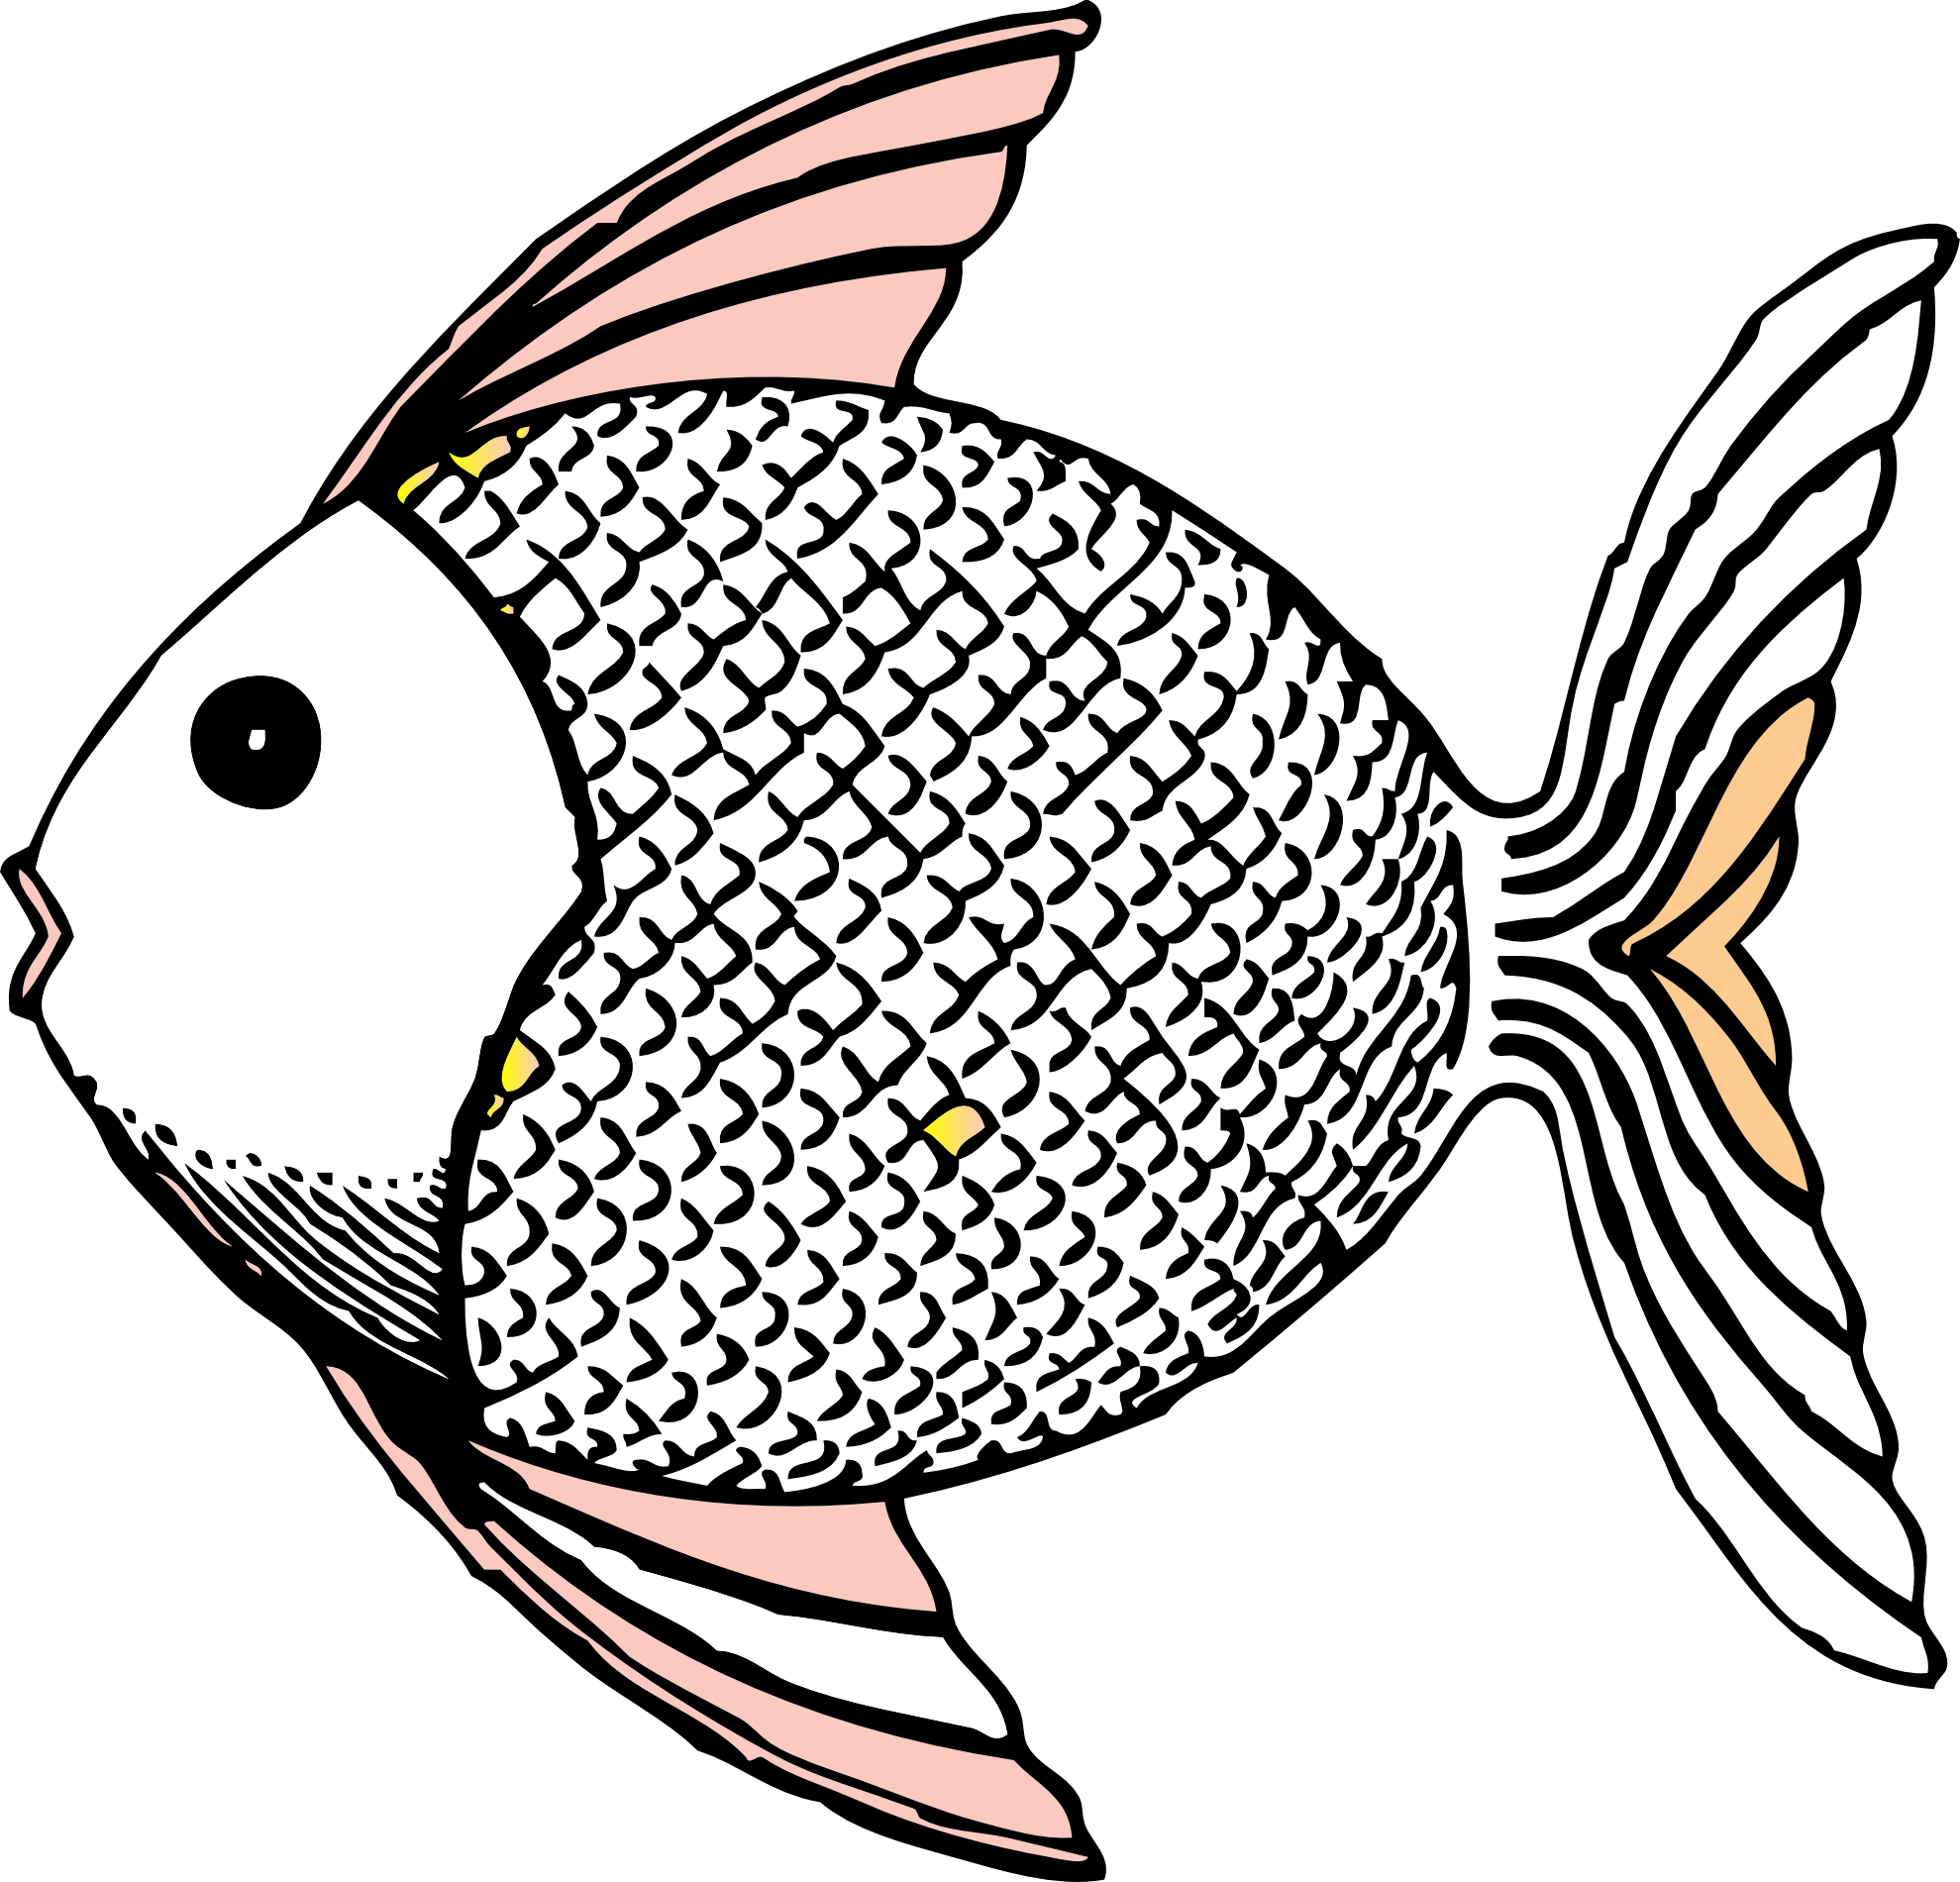 Fish Black And White Drawing - ClipArt Best